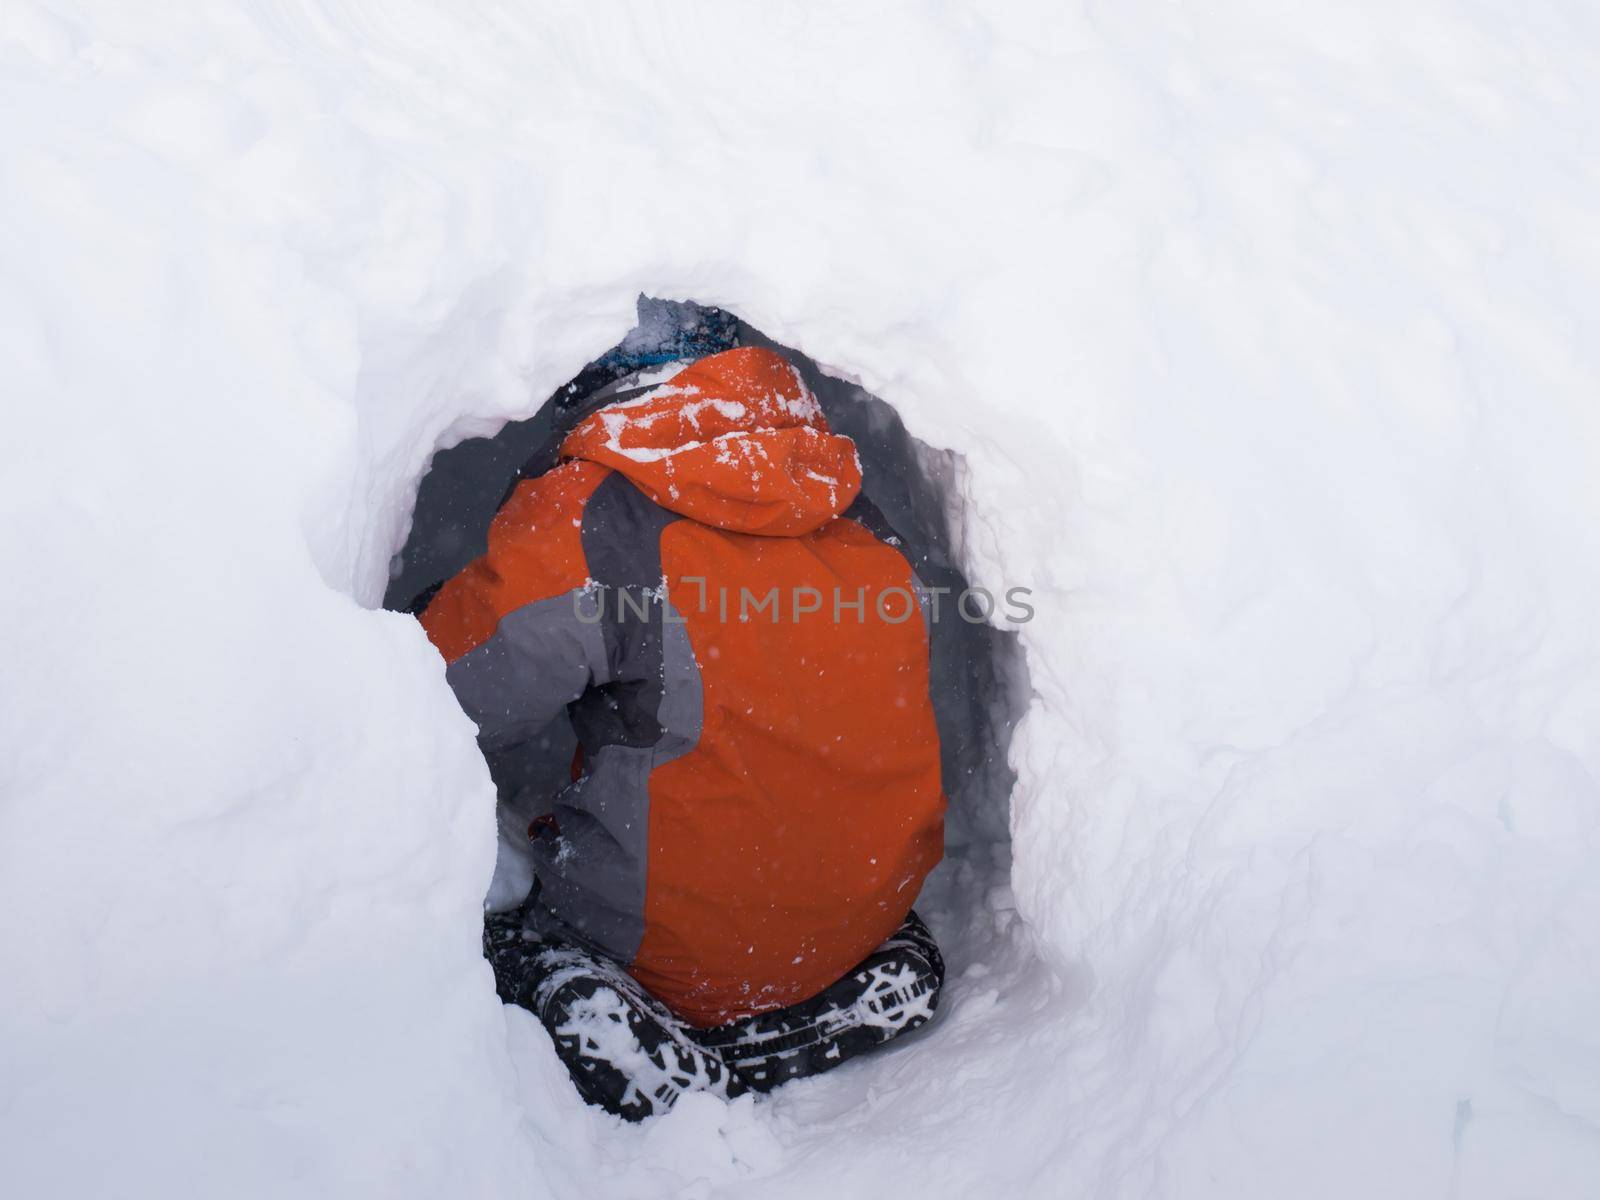 A boy digging the snow cave.